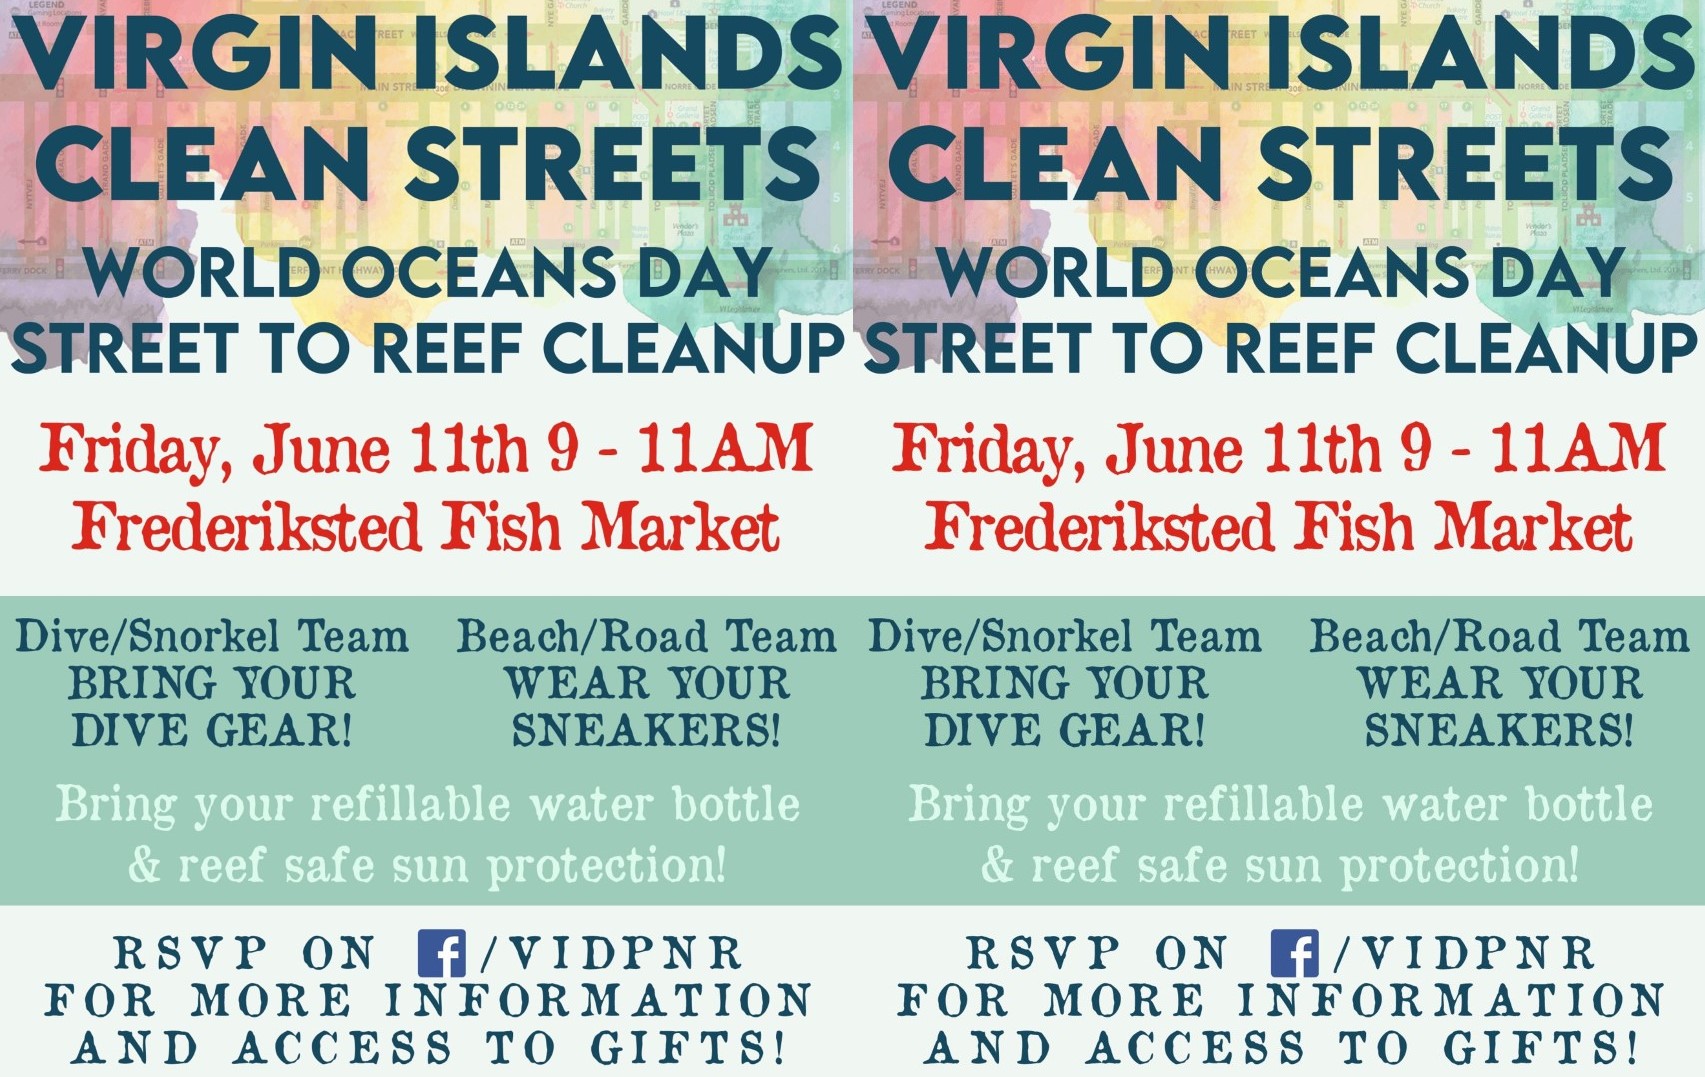 DPNR Celebrates World Oceans Day With Cleanup Of Frederiksted Fish Market